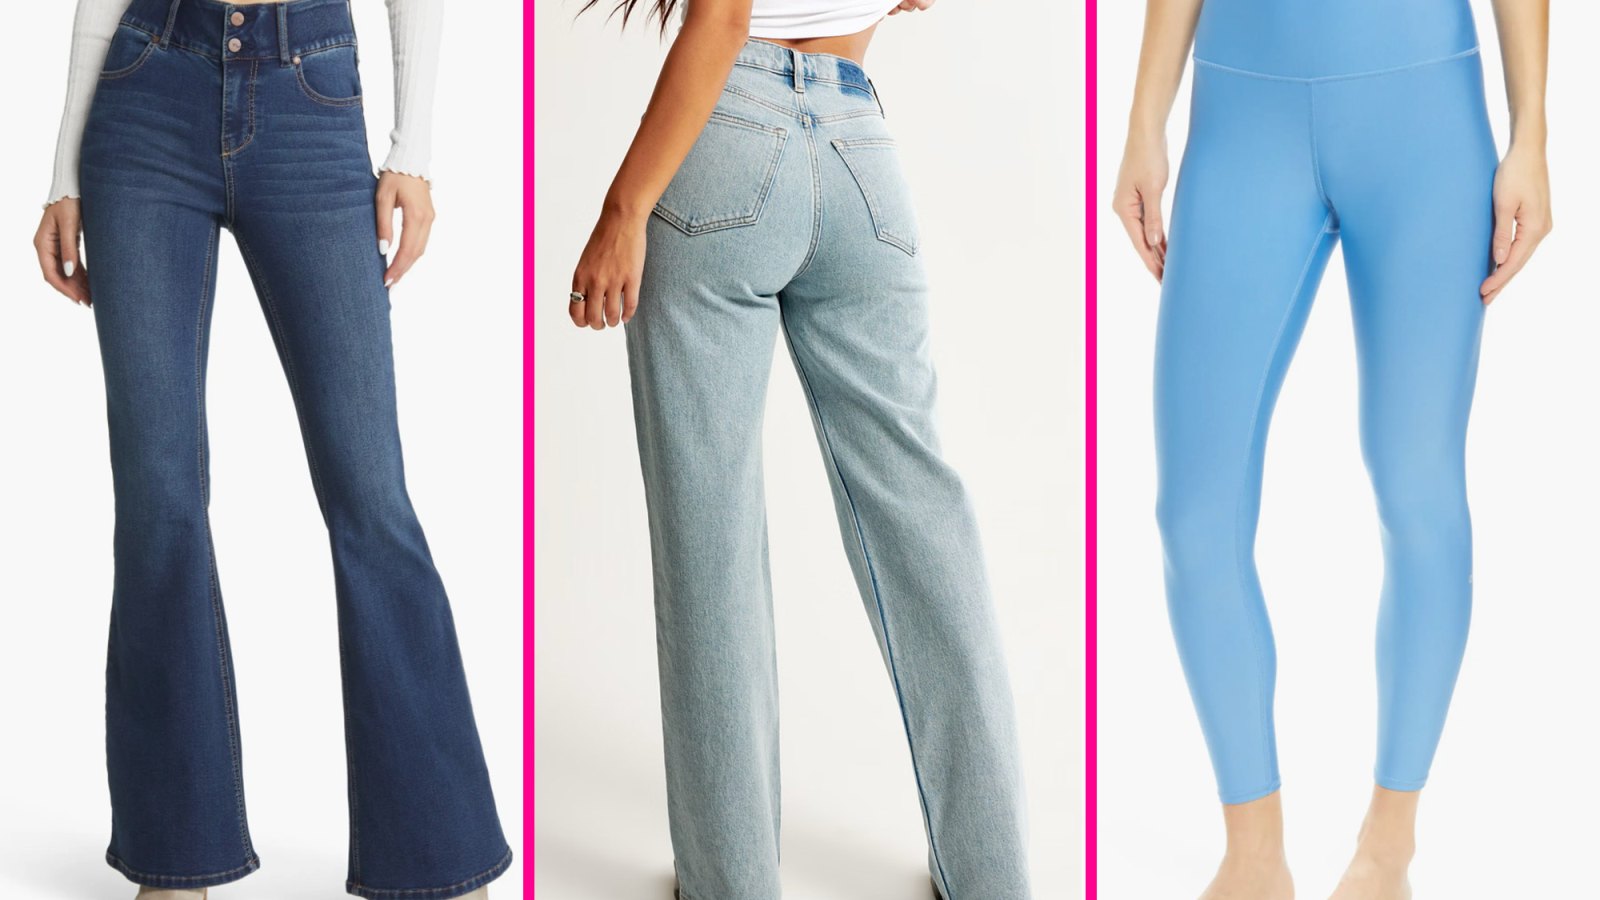 15 Figure-Flattering Pants That Are Chic and Ultra-Comfy